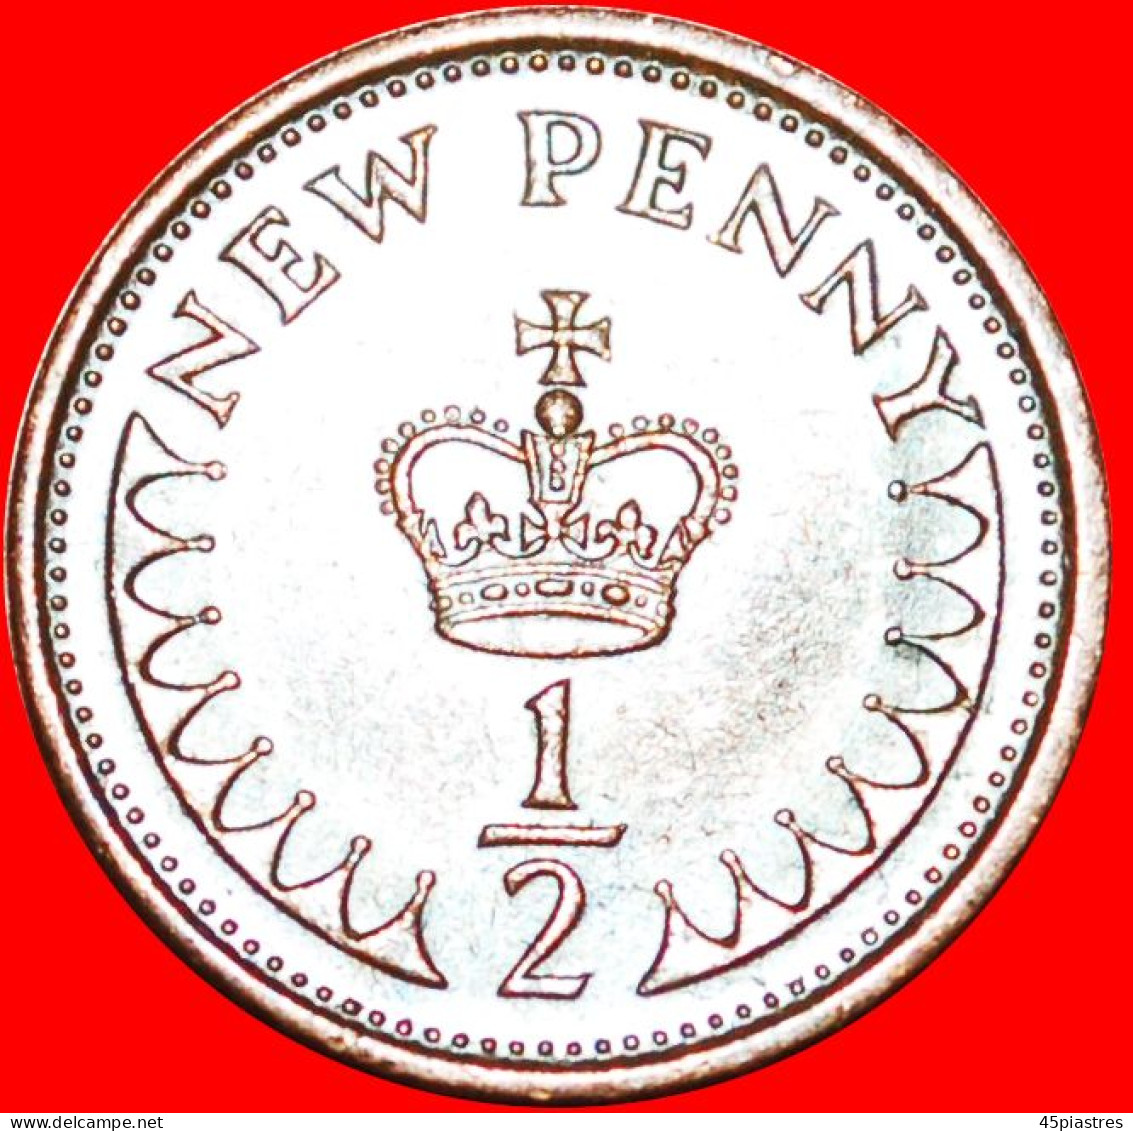 &#9733;CROWN: UNITED KINGDOM&#9733;HALF NEW PENNY 1975! LOW START &#9733; NO RESERVE! House Of Tudor(1485 - 1603) - 1/2 Penny & 1/2 New Penny